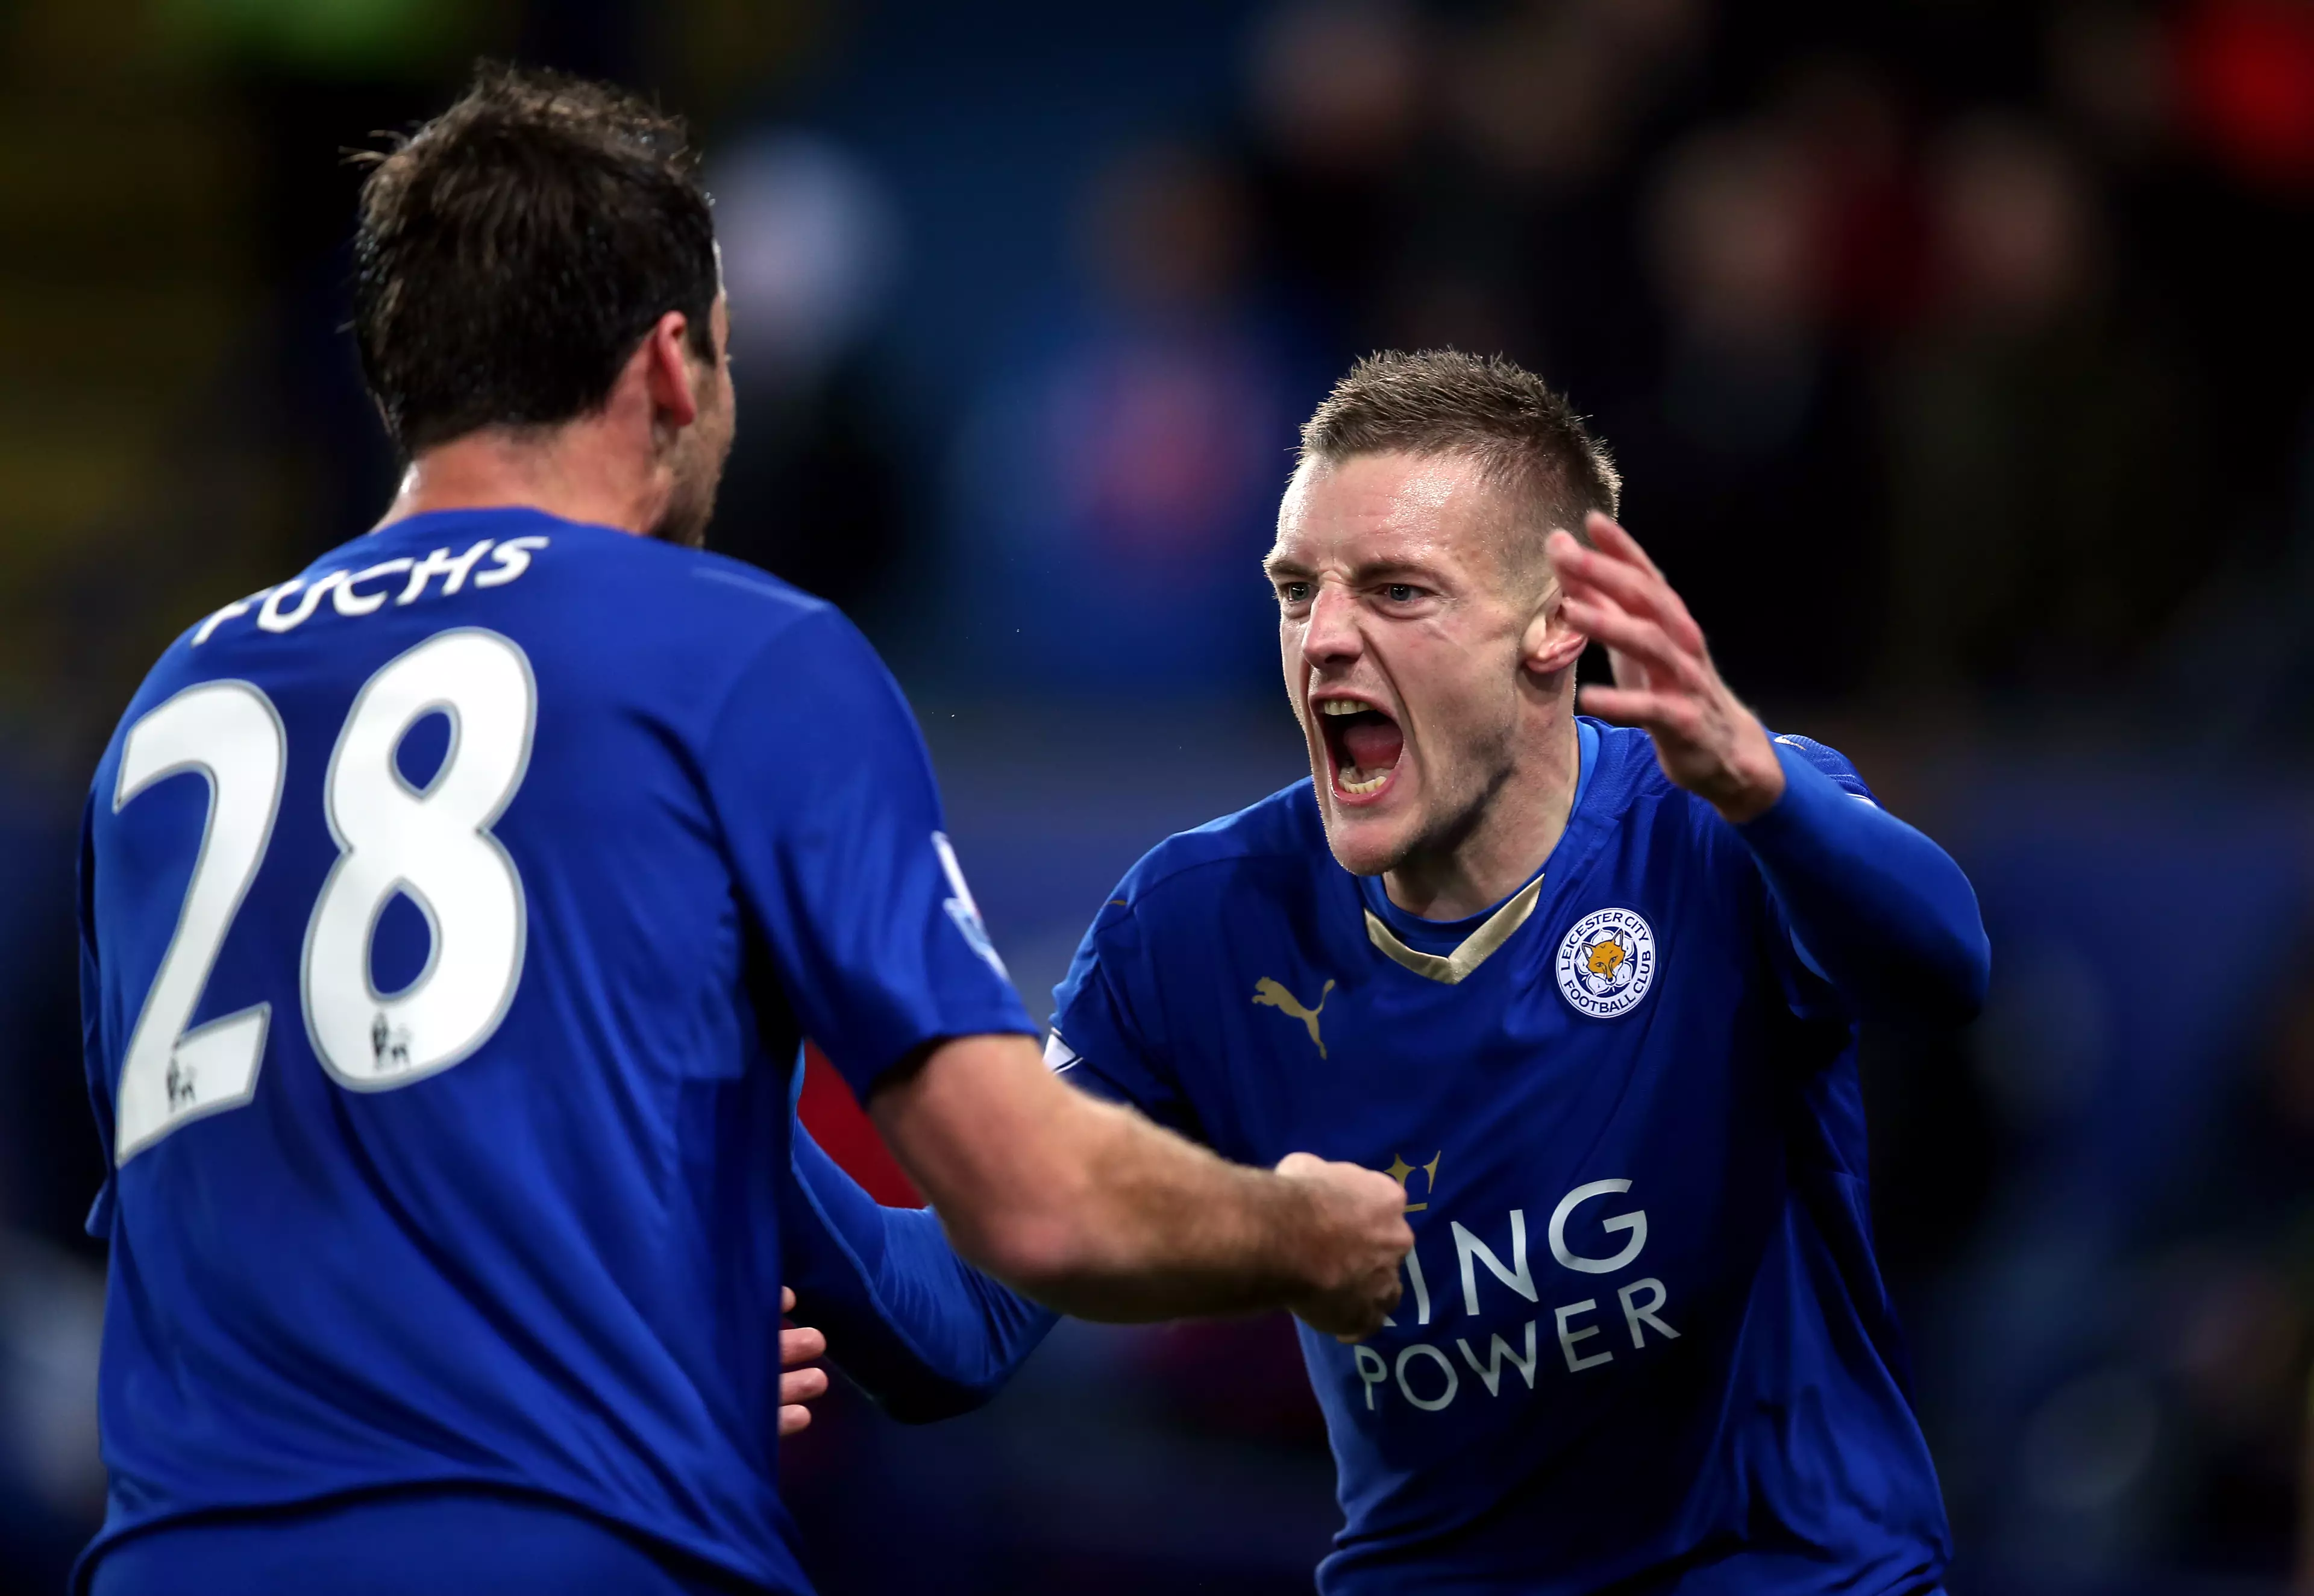 Vardy celebrates breaking Van Nistelrooy's record at Manchester United. Part of an incredible decade of moving from non league to Premier League champion. Image: PA Images